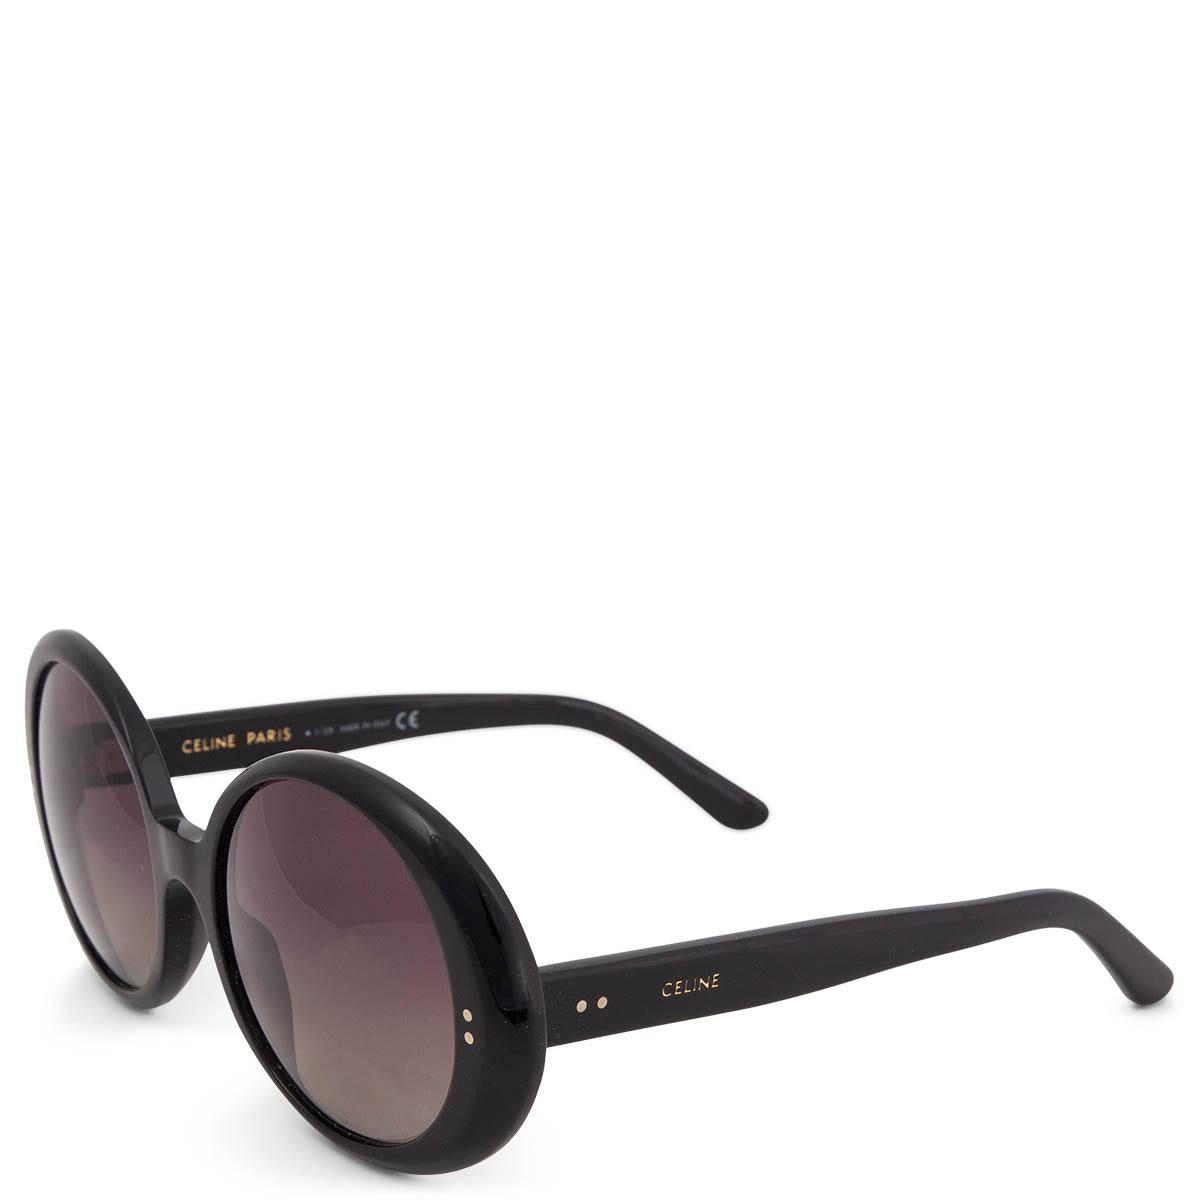 100% authentic Celine CL400651 oval shaped sunglasses in black acetate with gradient black lenses. Features a round black acetate frame. Have been worn and are in excellent condition. Come without case. 

Measurements
Model	CL400651
Width	15cm